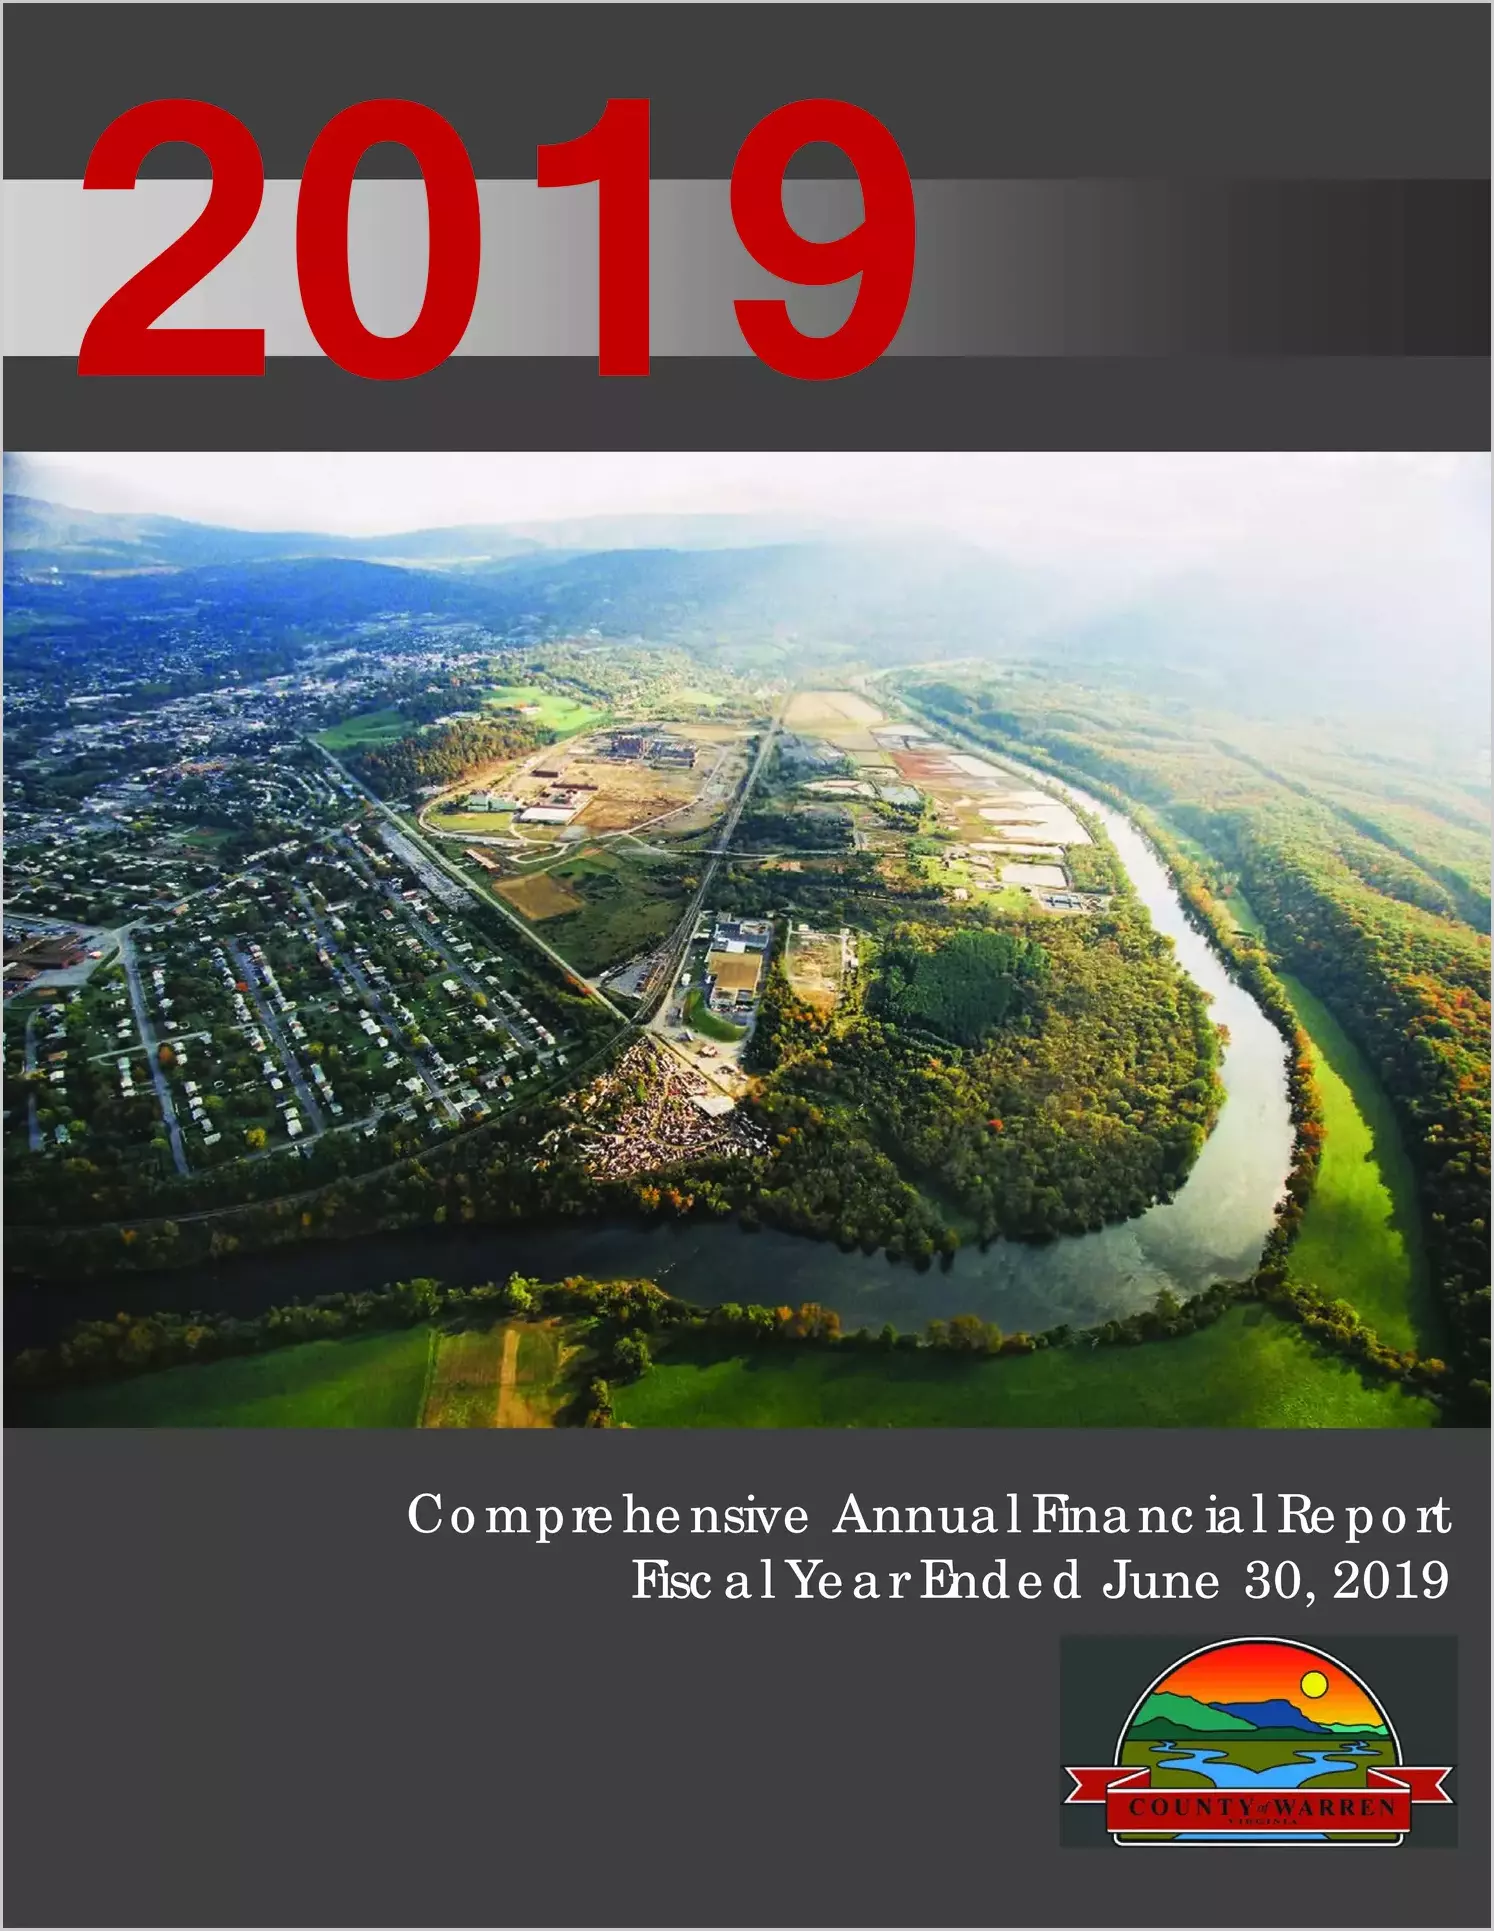 2019 Annual Financial Report for County of Warren